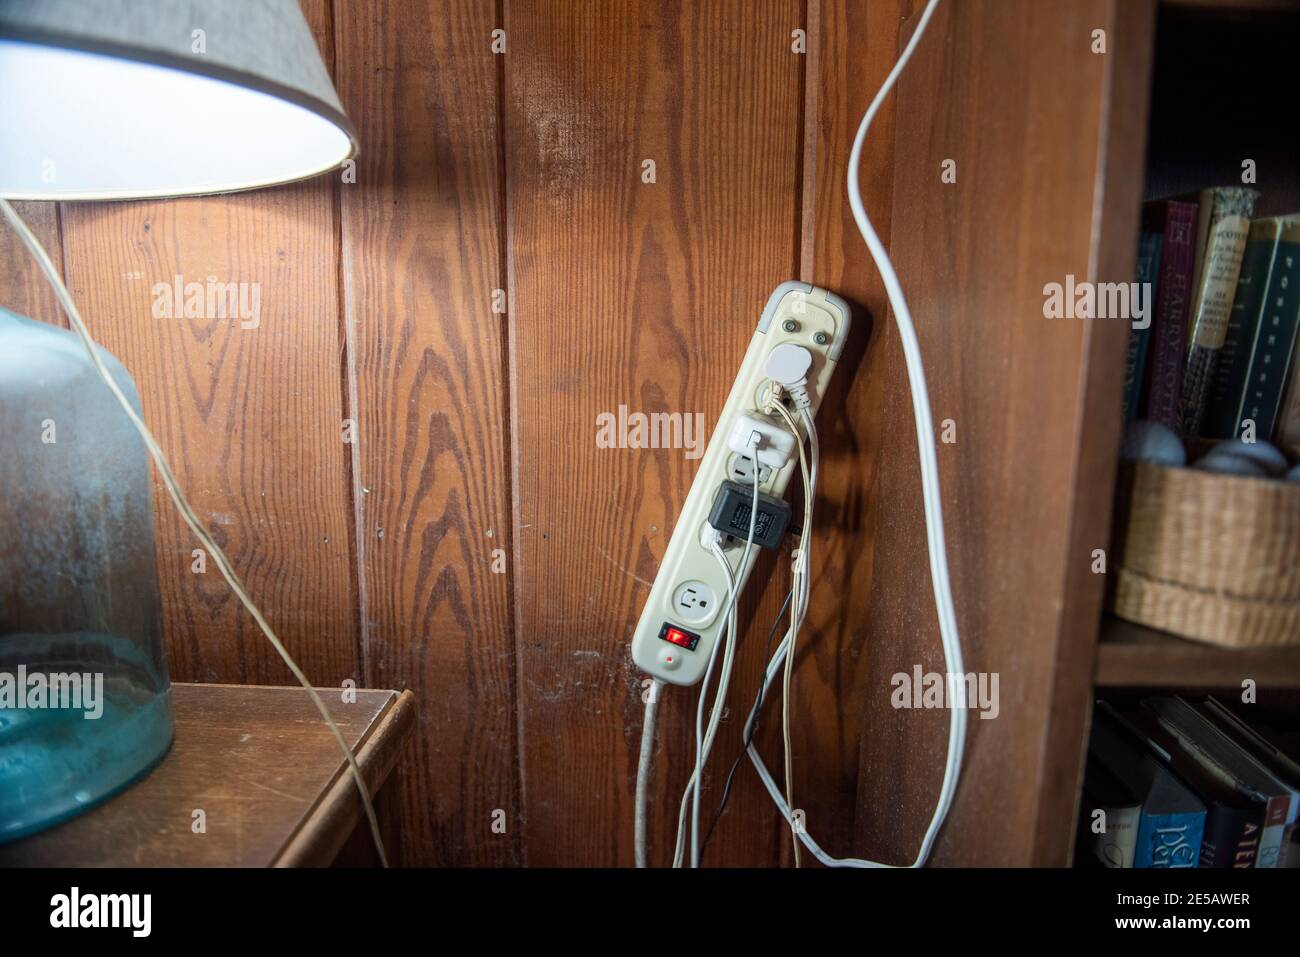 A surge protector with many cords plugged in is mounted on the wall. Stock Photo